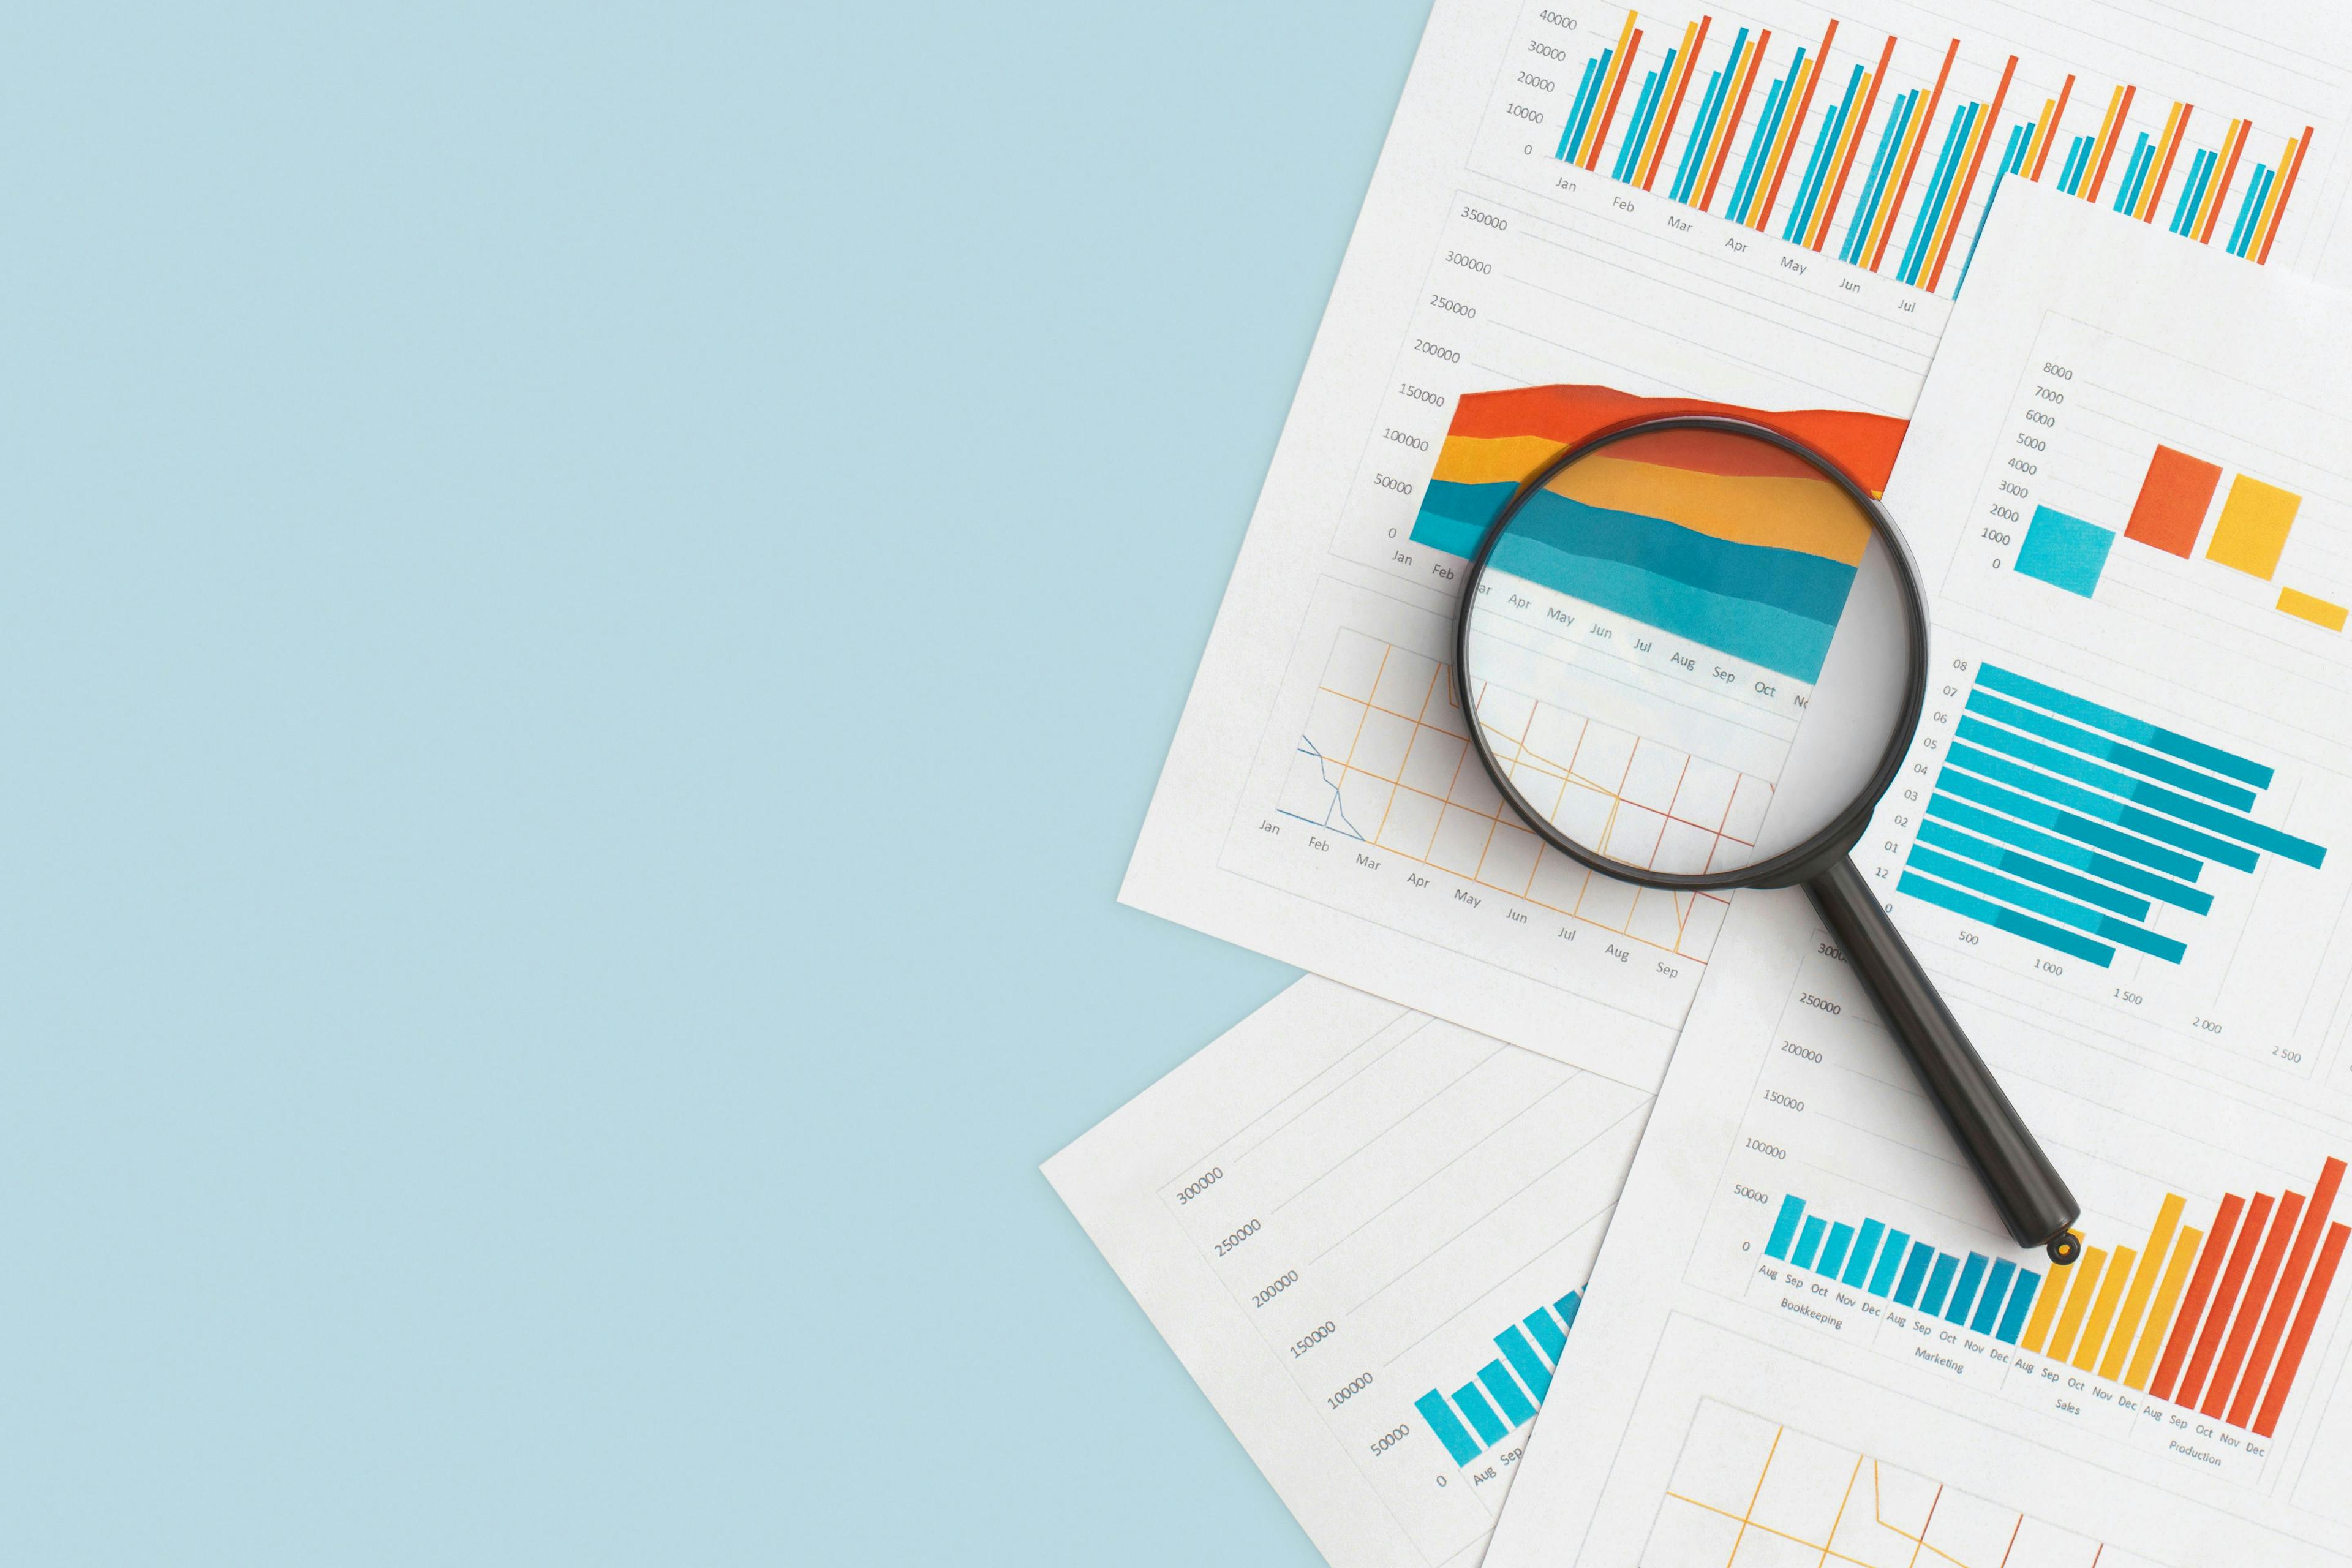 magnifying glass and charts | Image credit: Lunakate   stock.adobe.com